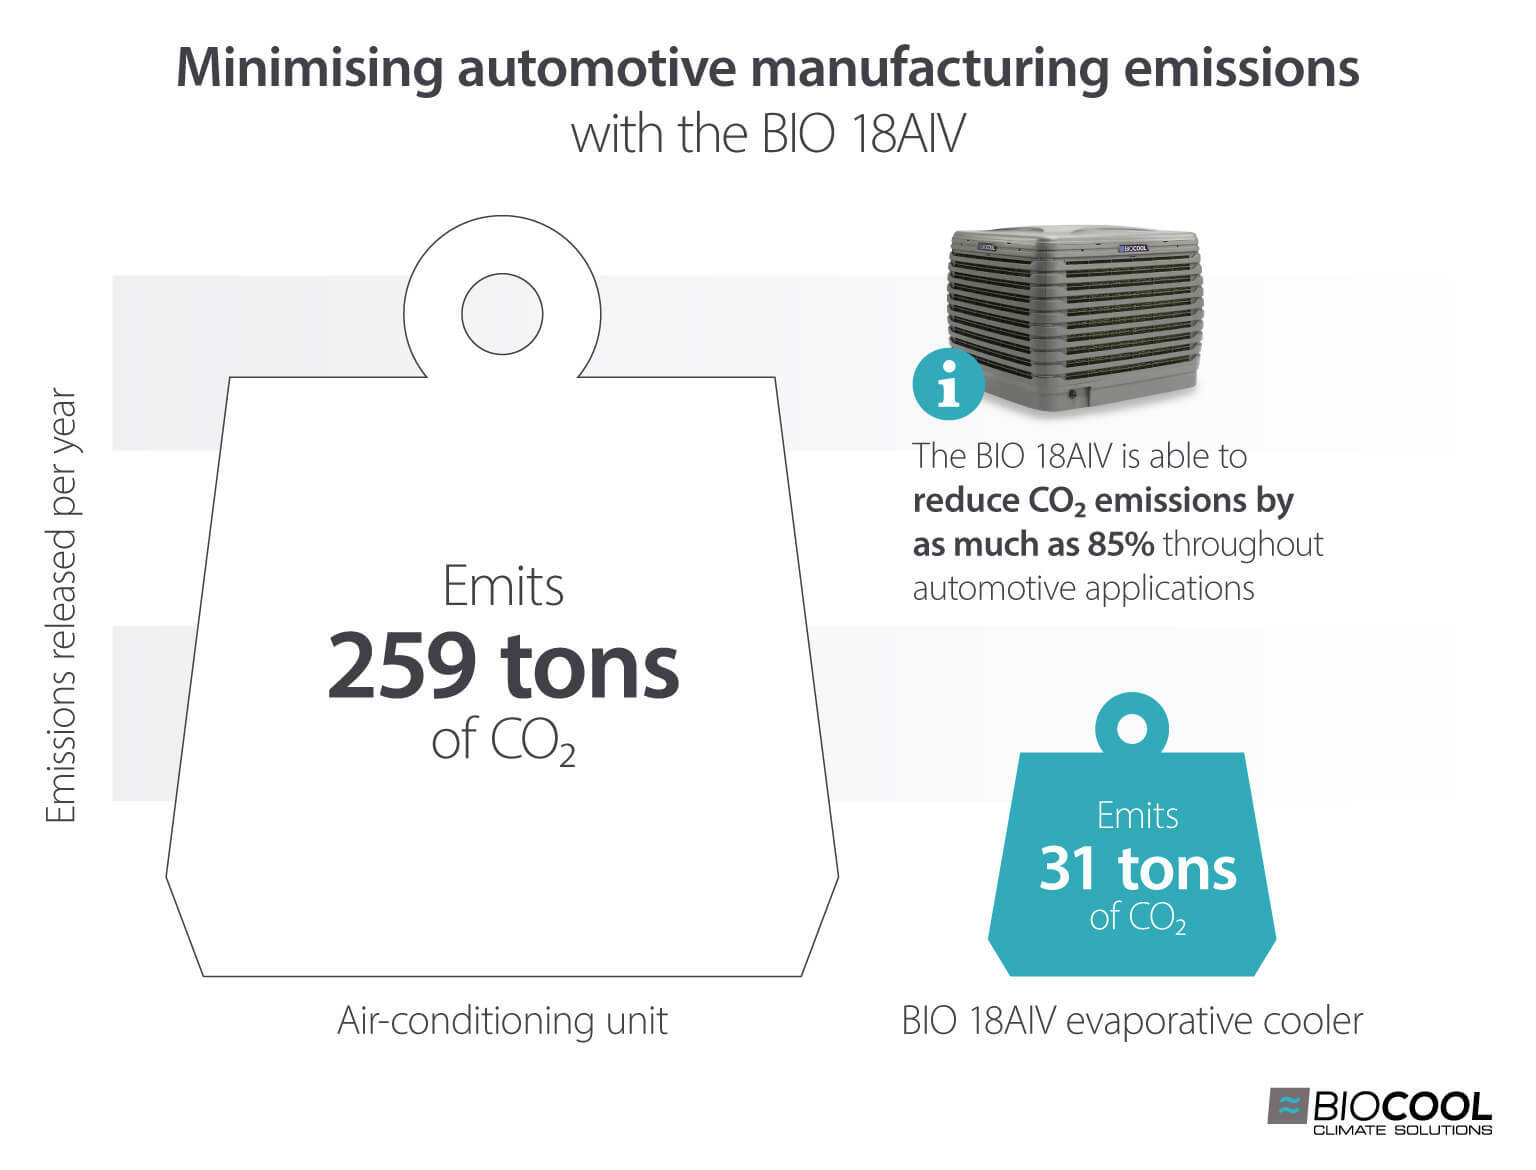 How evaporative coolers reduce automotive manufacturing emissions compared to air conditioning - Infographic image